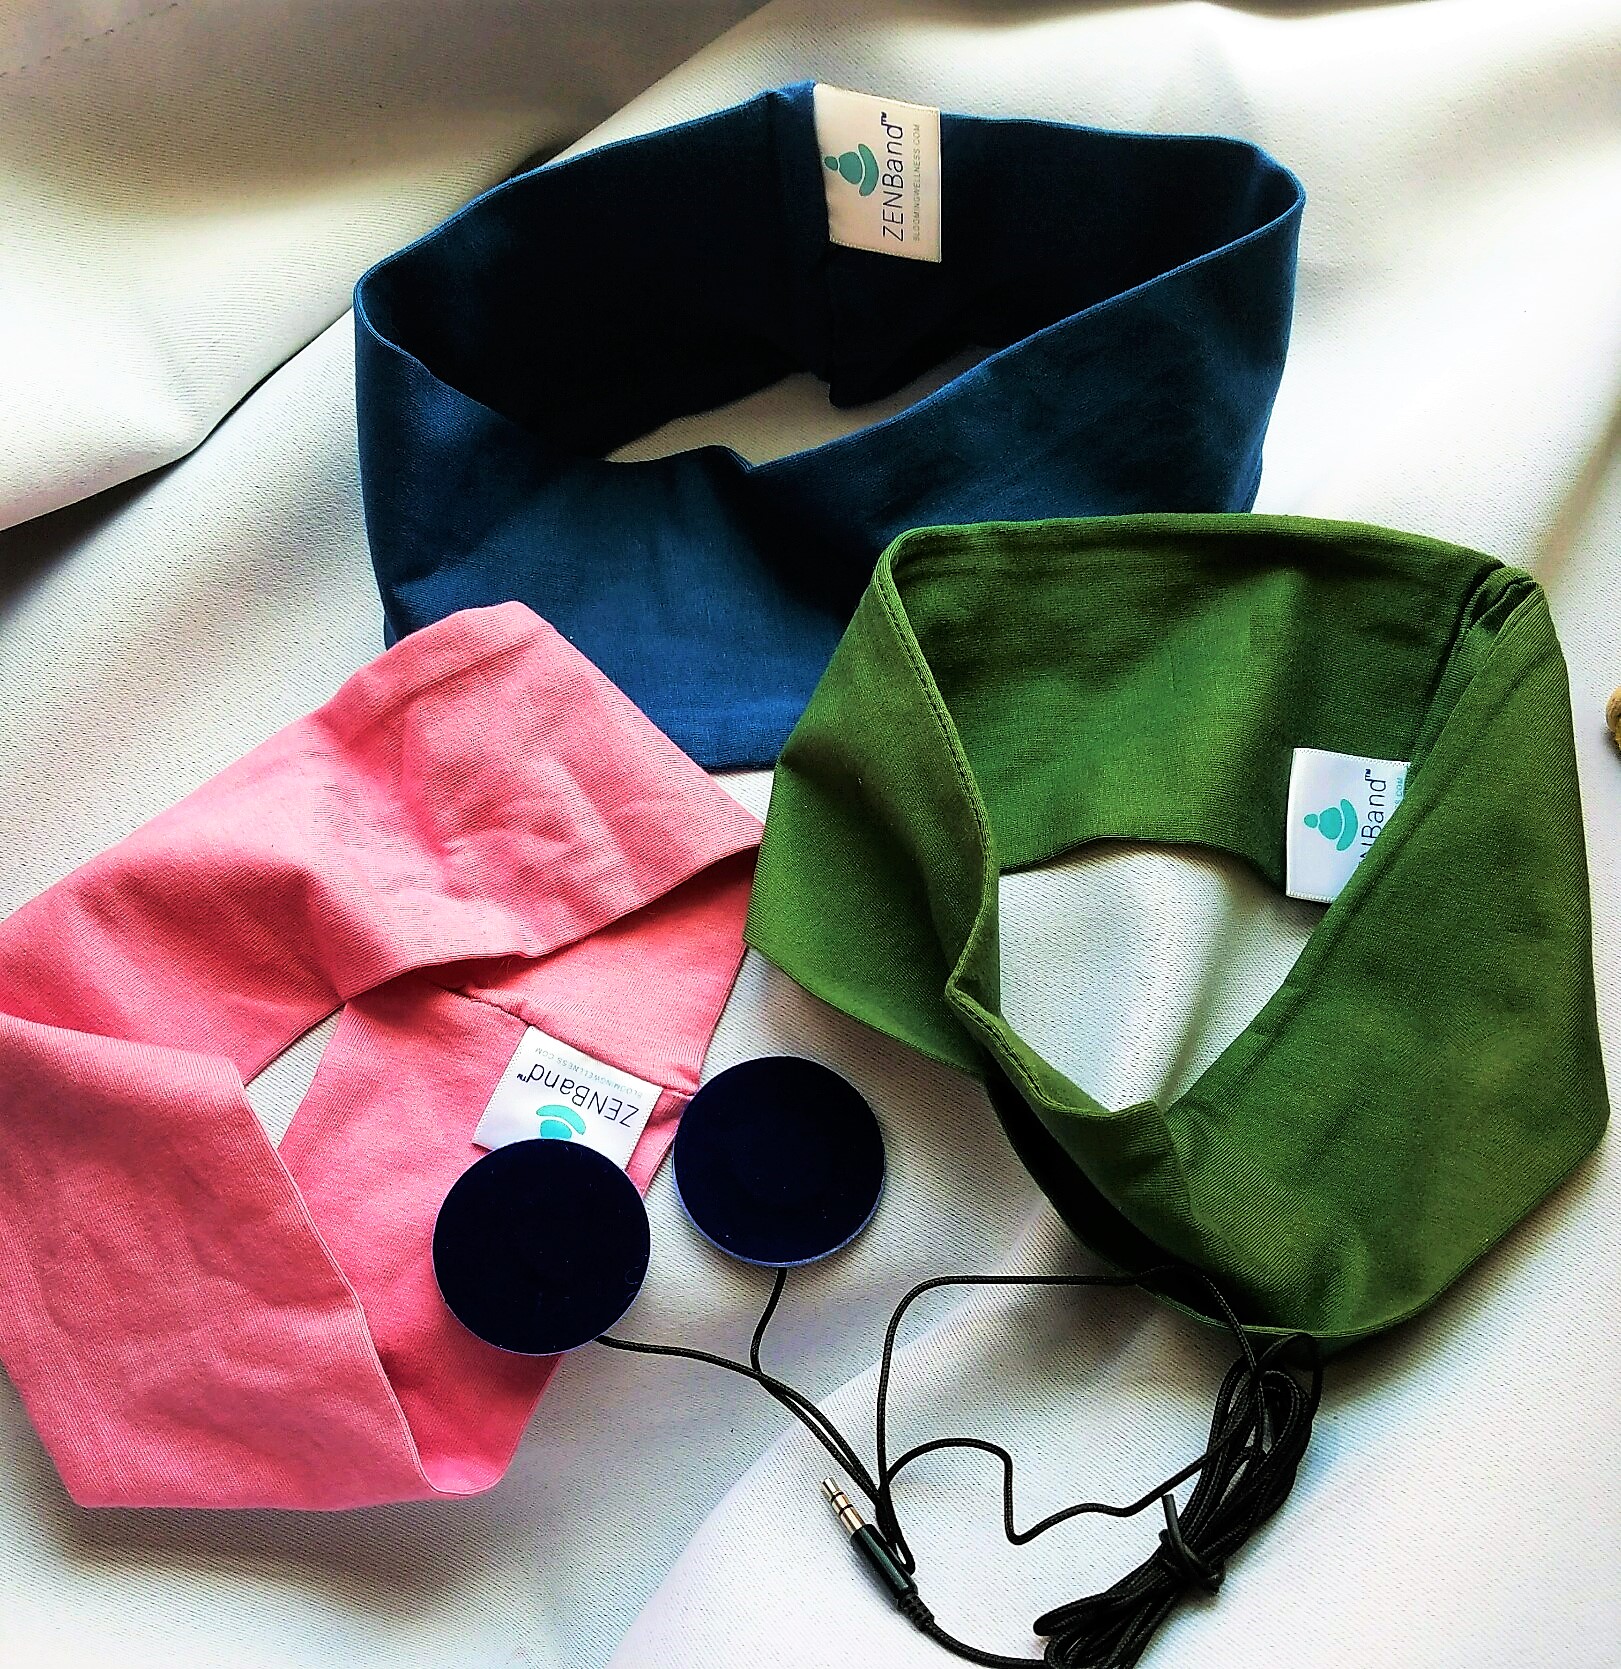 The ZENBand headband is perfect for working out and relaxing!